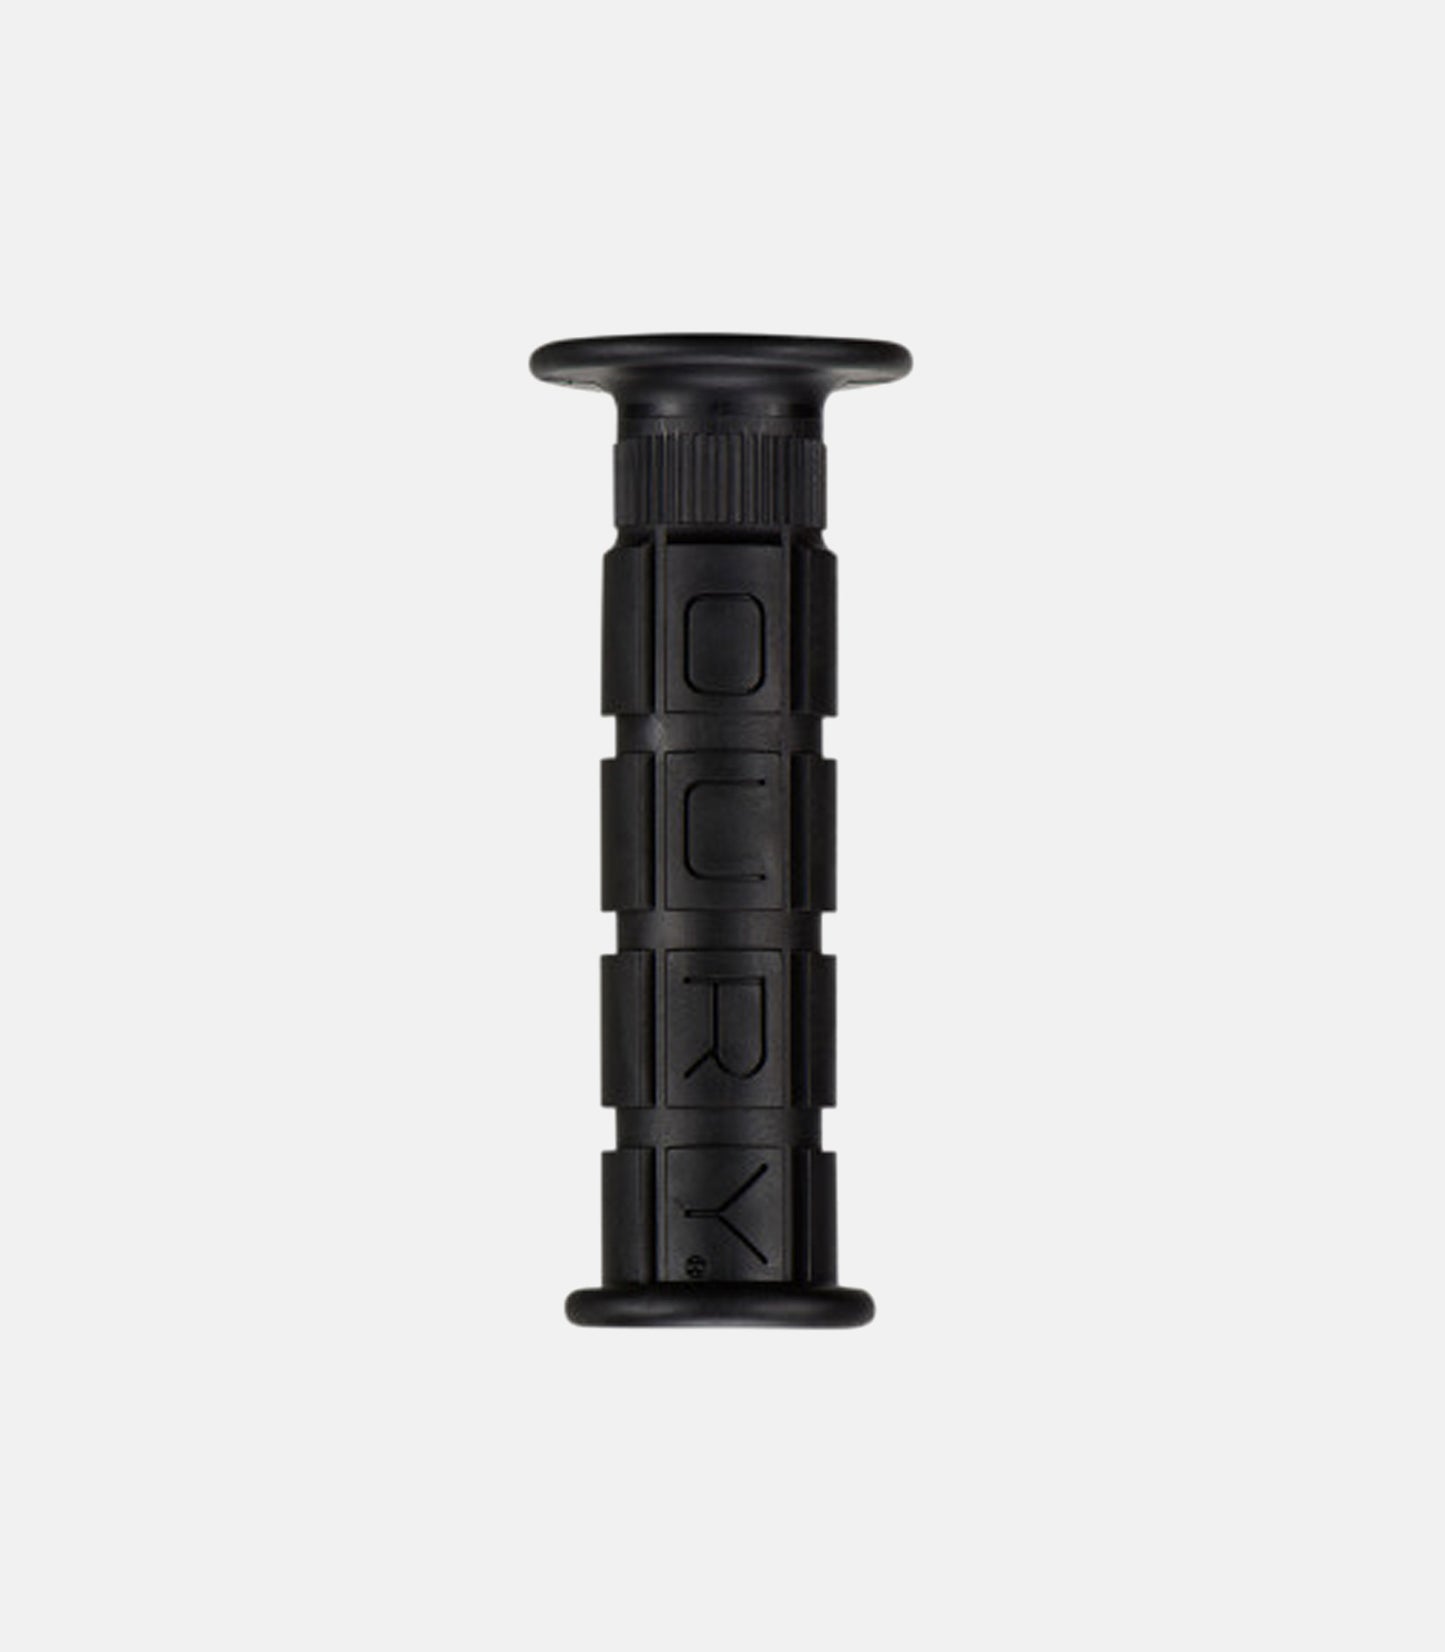 OURY GRIPS 7/8" Single Compound Flange Grips - Black